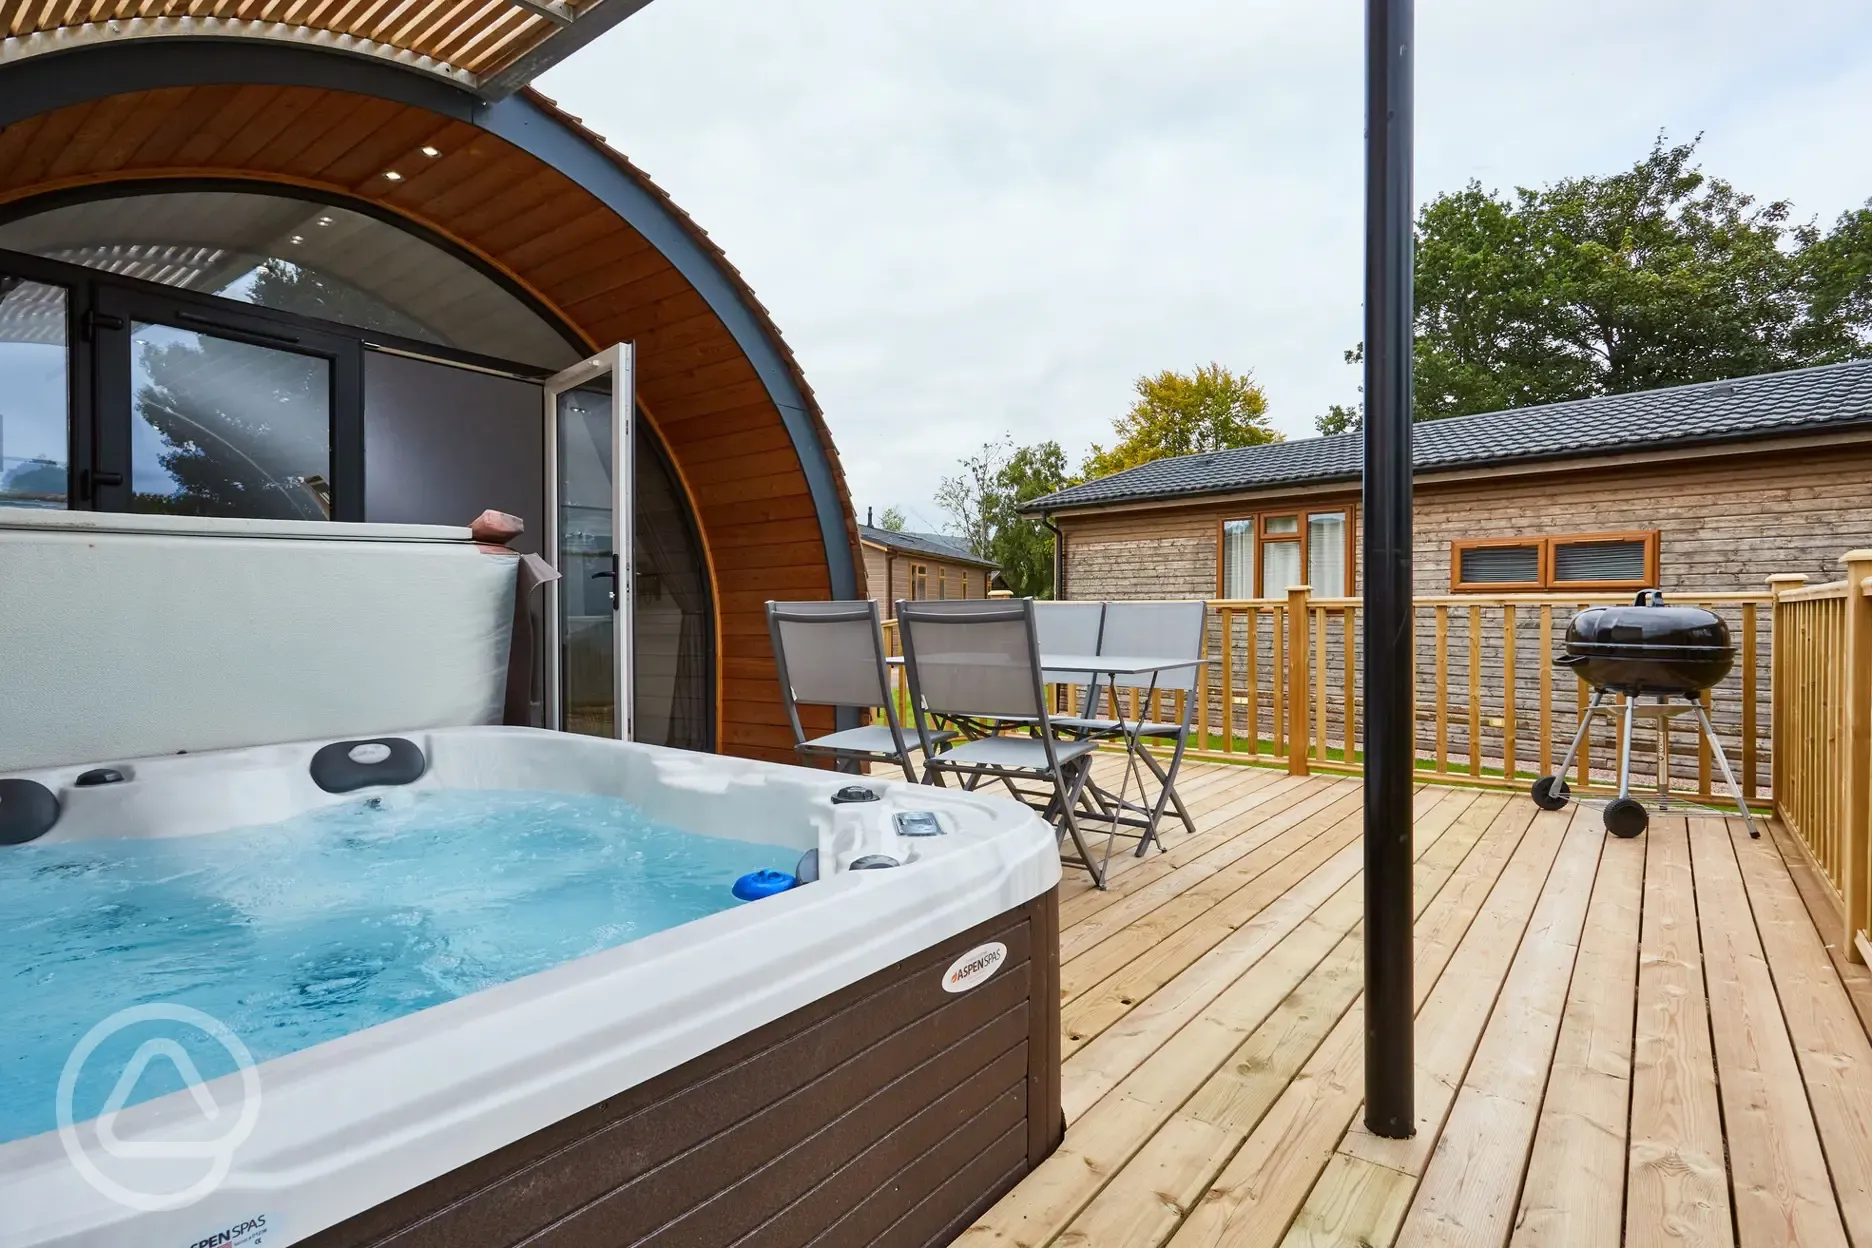 Large pod decking area with hot tub 